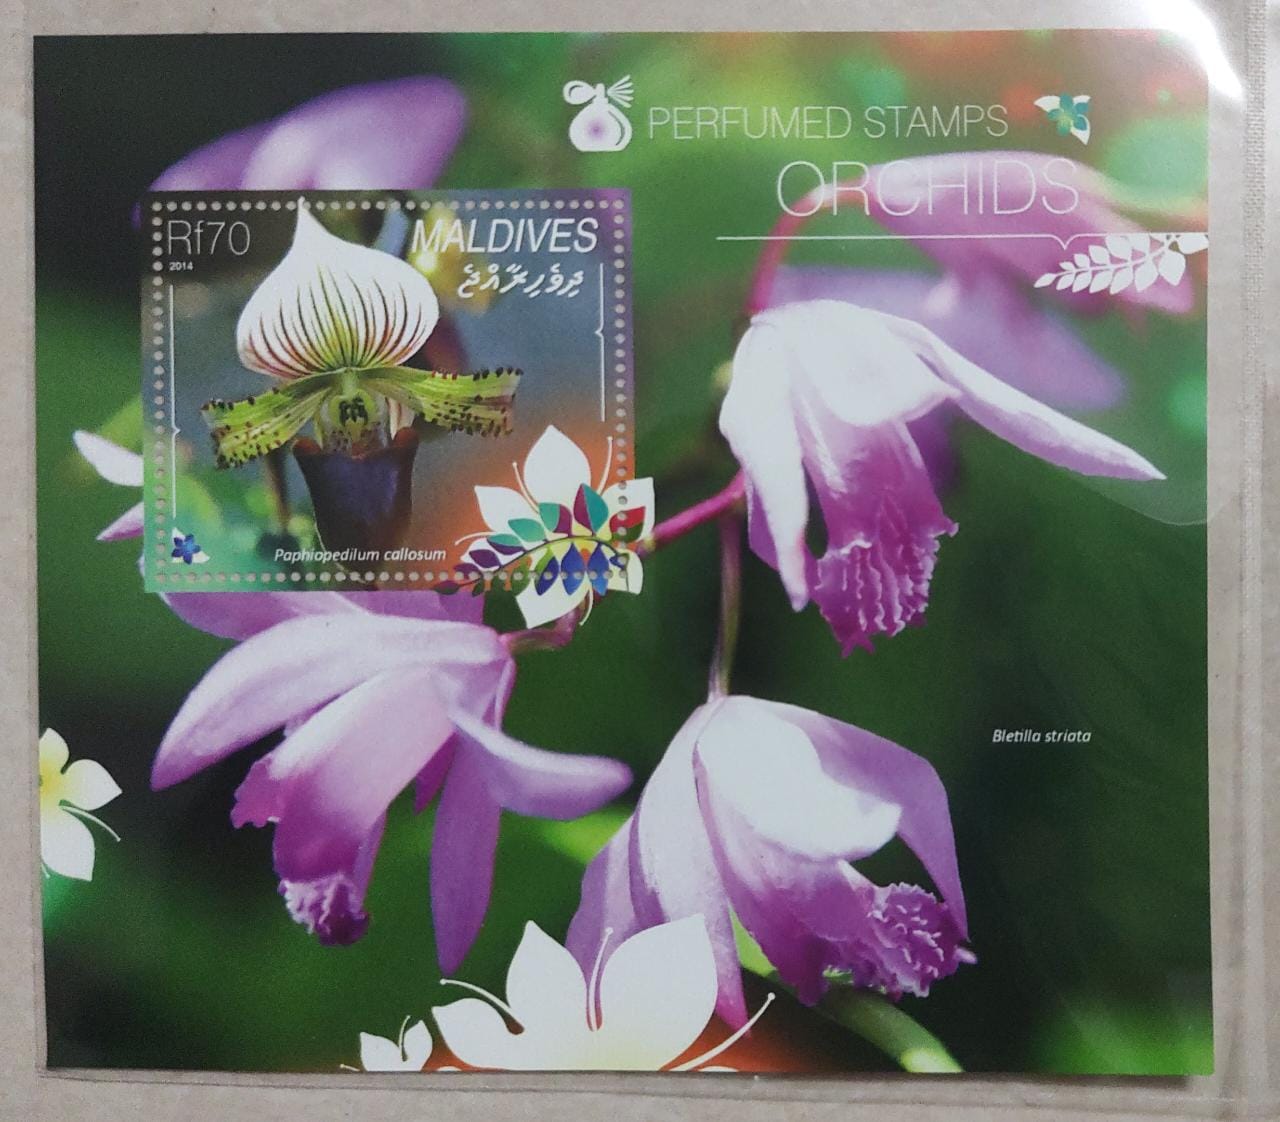 Maldives wild orchid scented ms issued in 2014  Packed in airtight bopp .